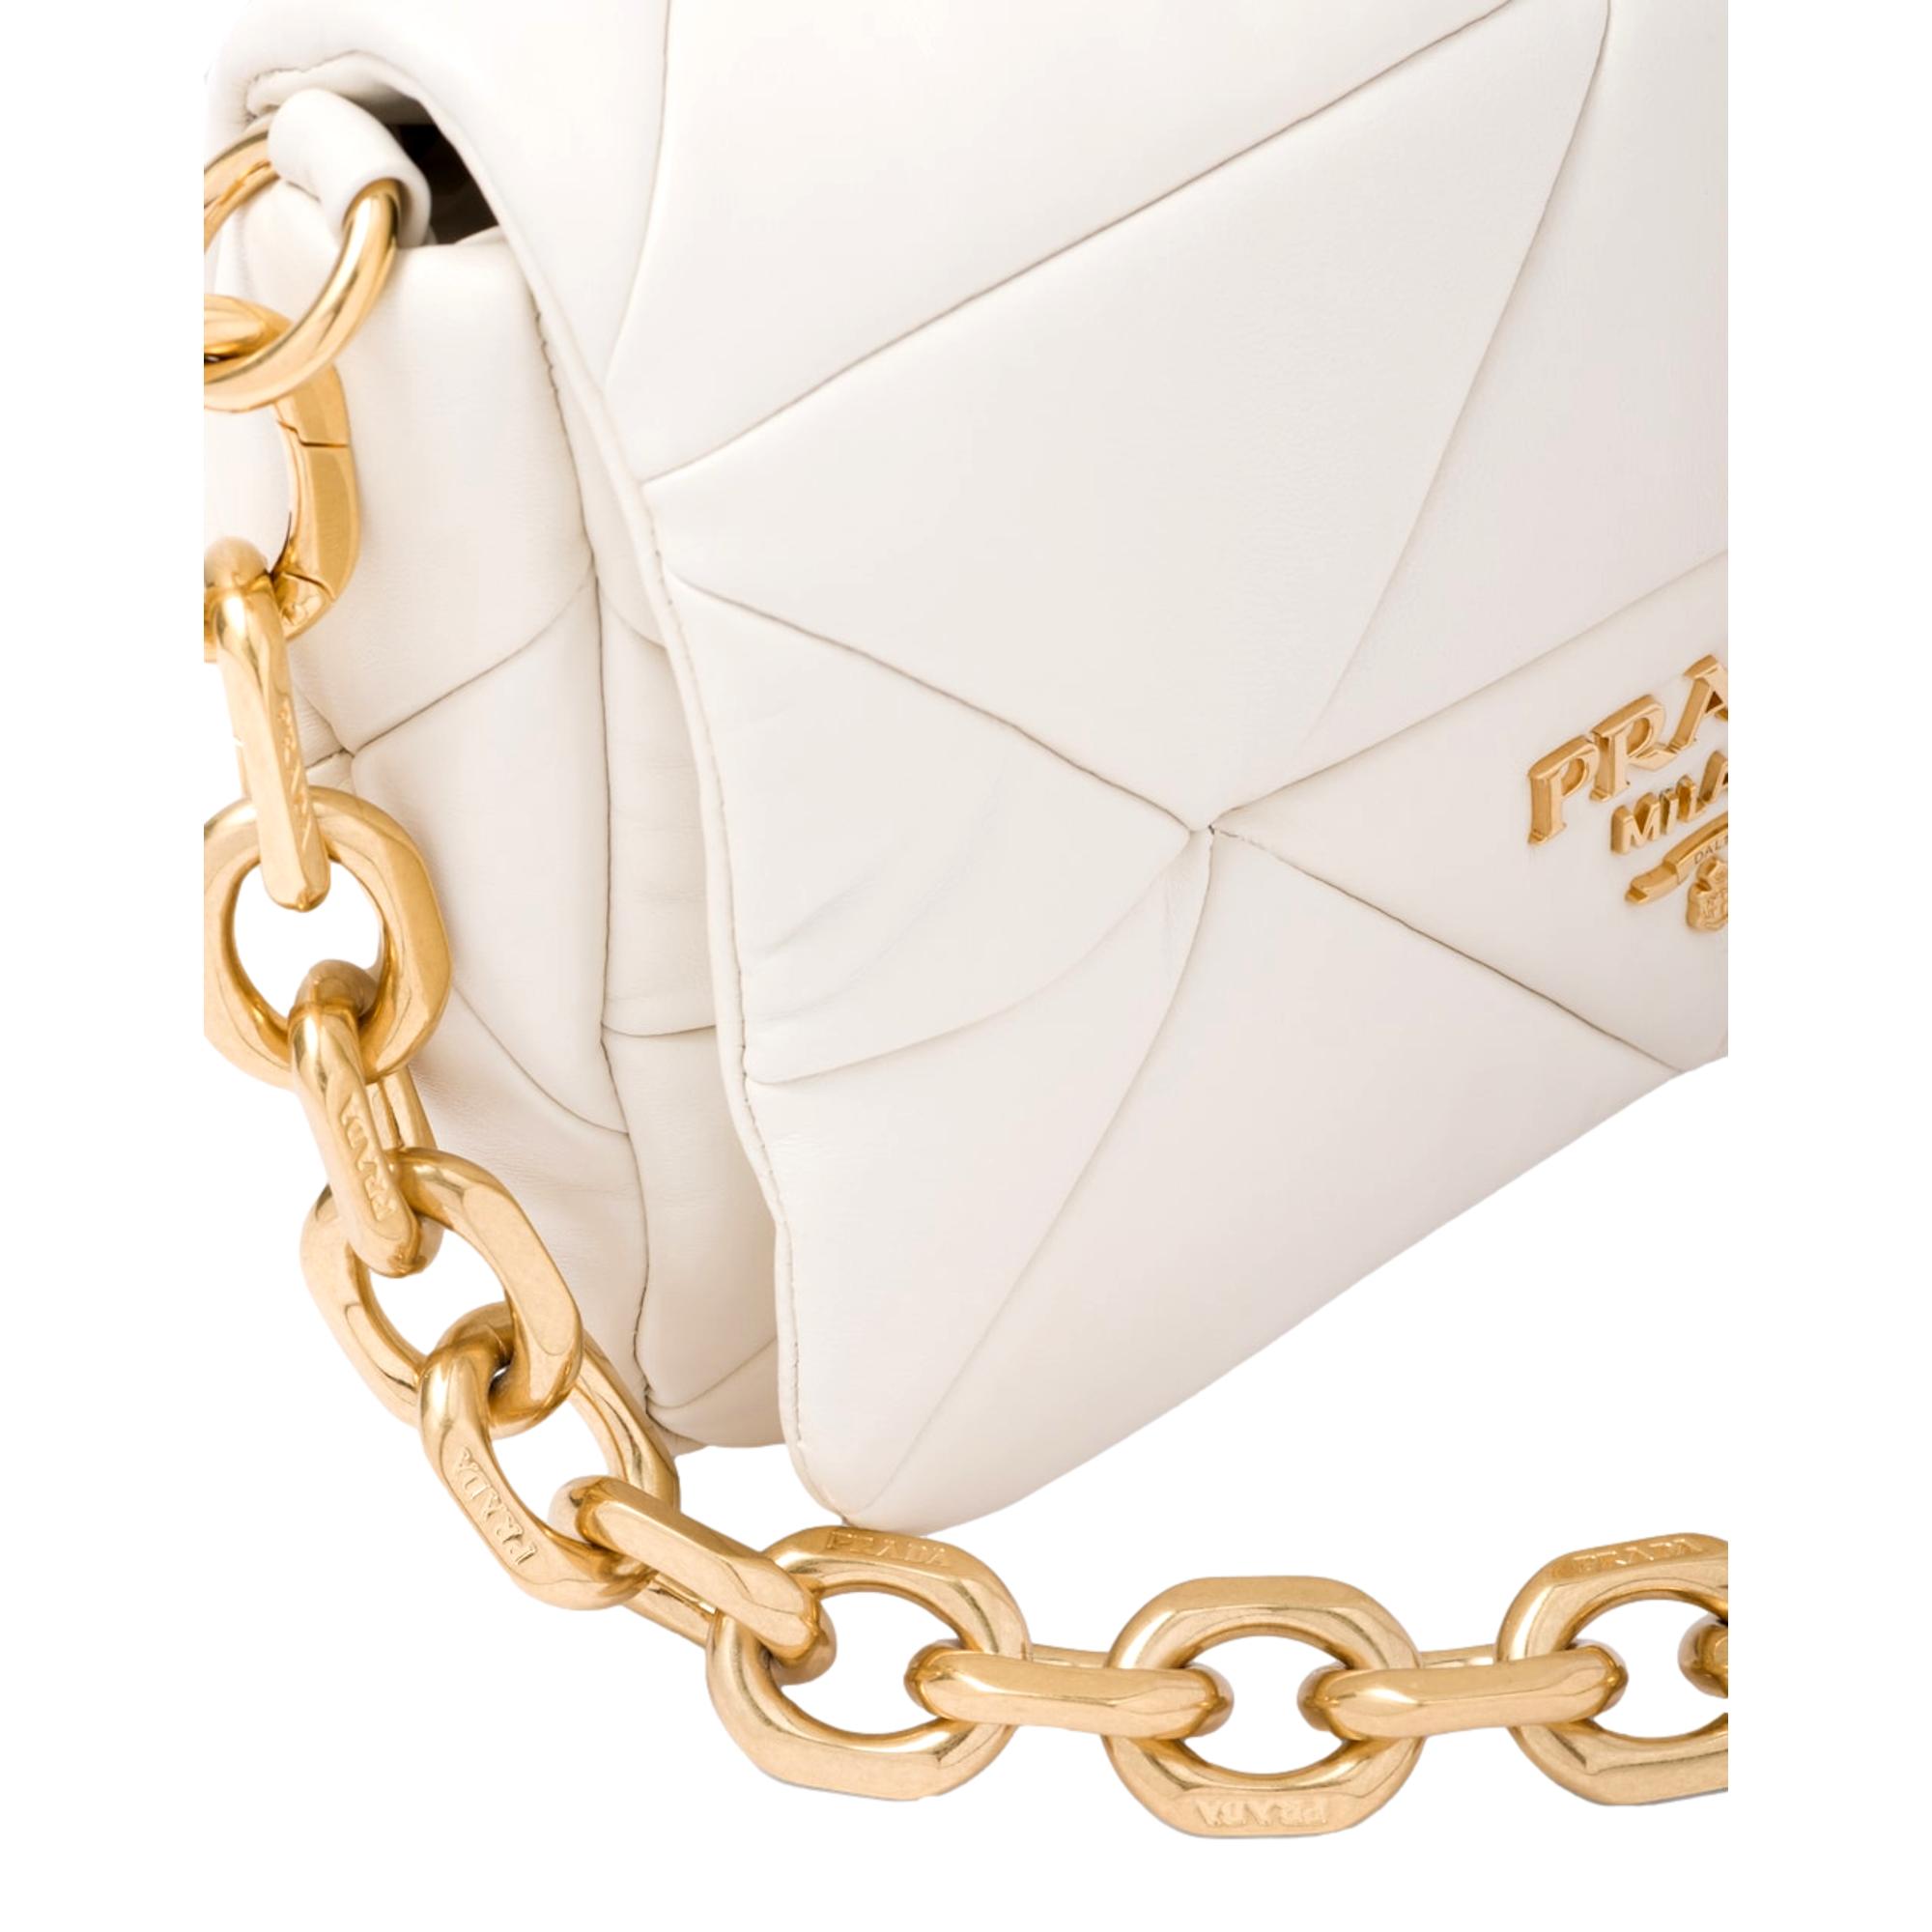 Prada Gold Logo Ivory Quilted Nappa Patch Leather Shoulder Bag